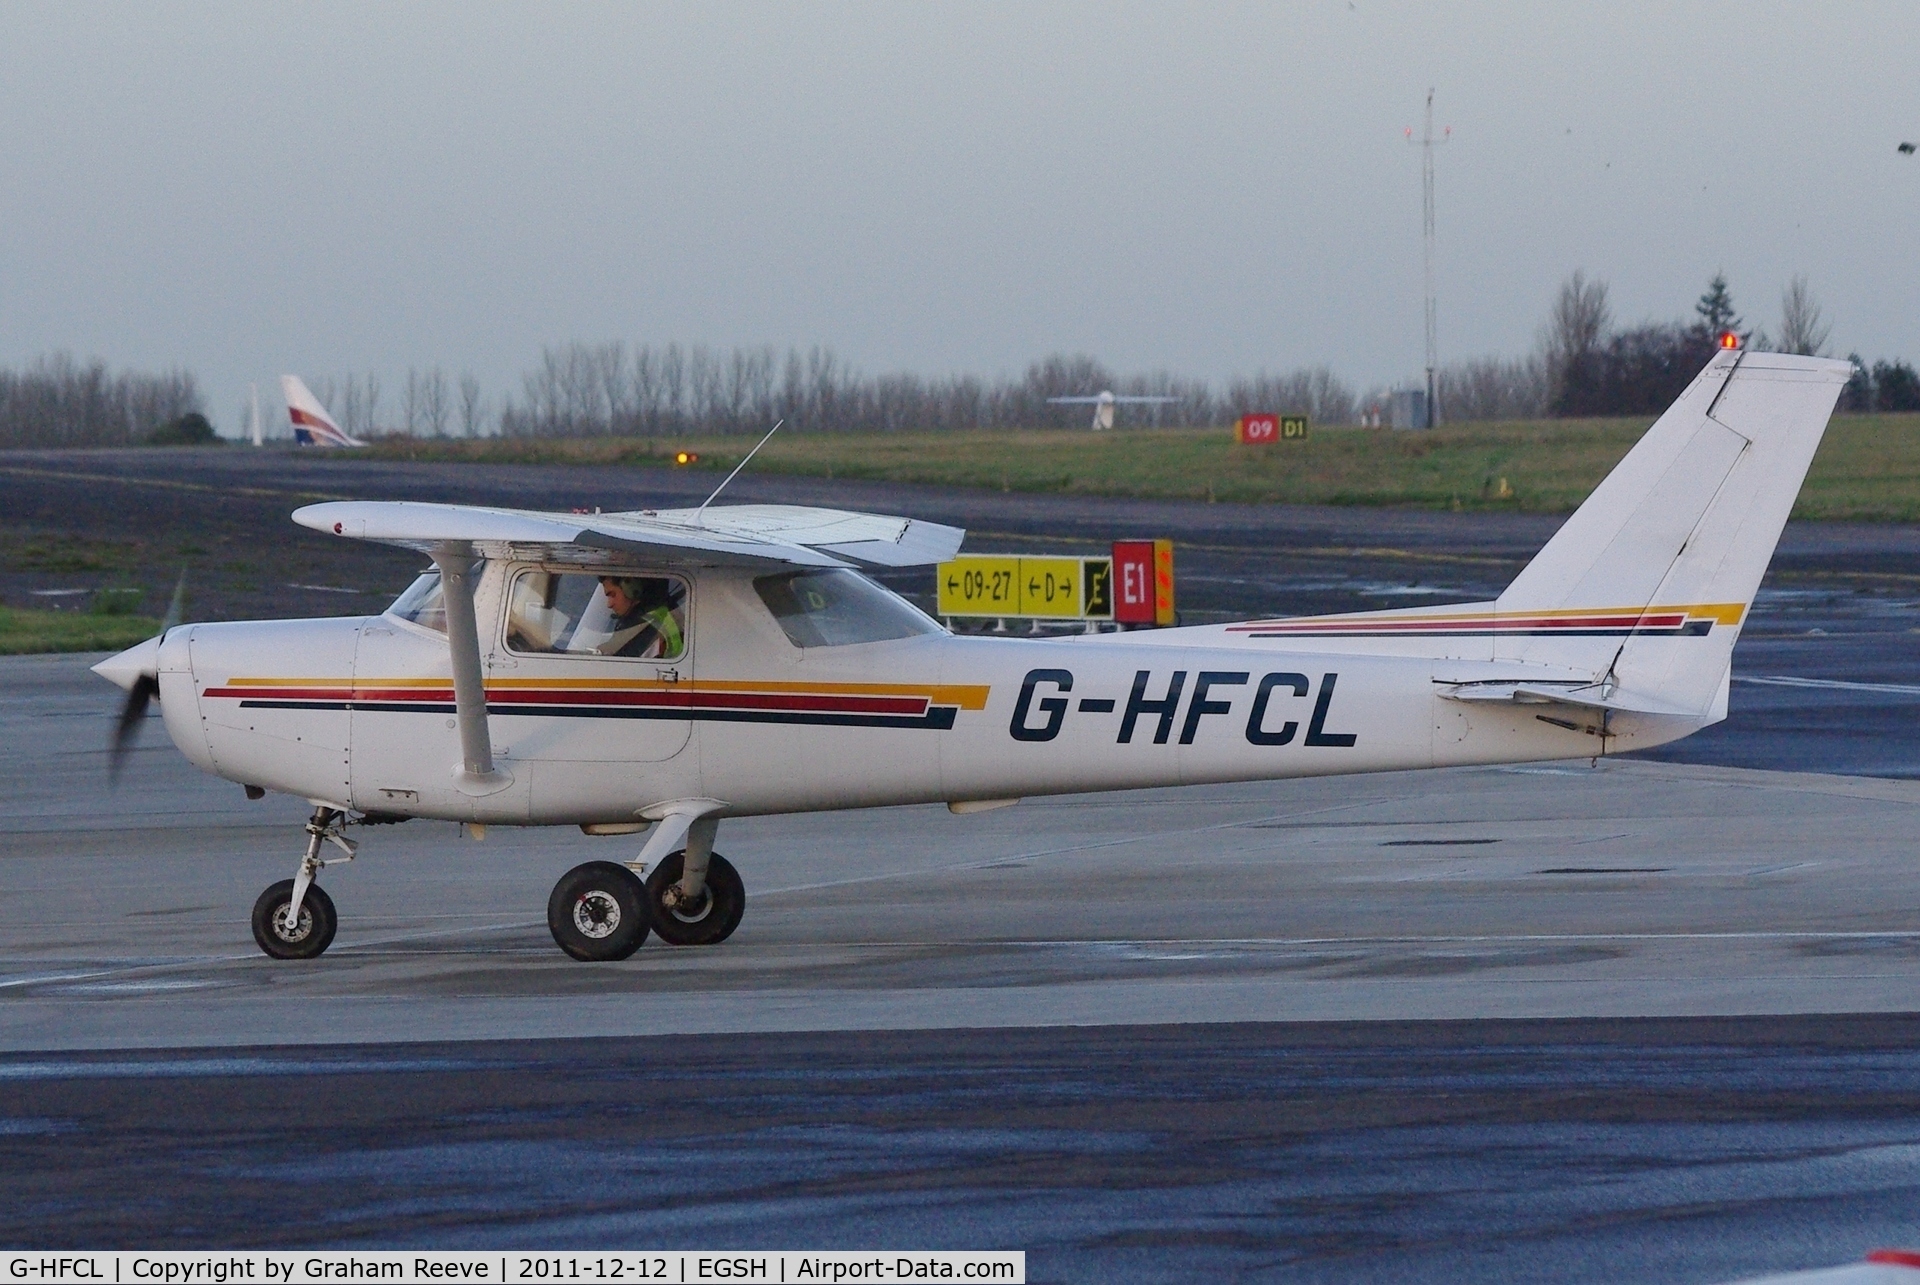 G-HFCL, 1979 Reims F152 C/N 1663, About to depart.